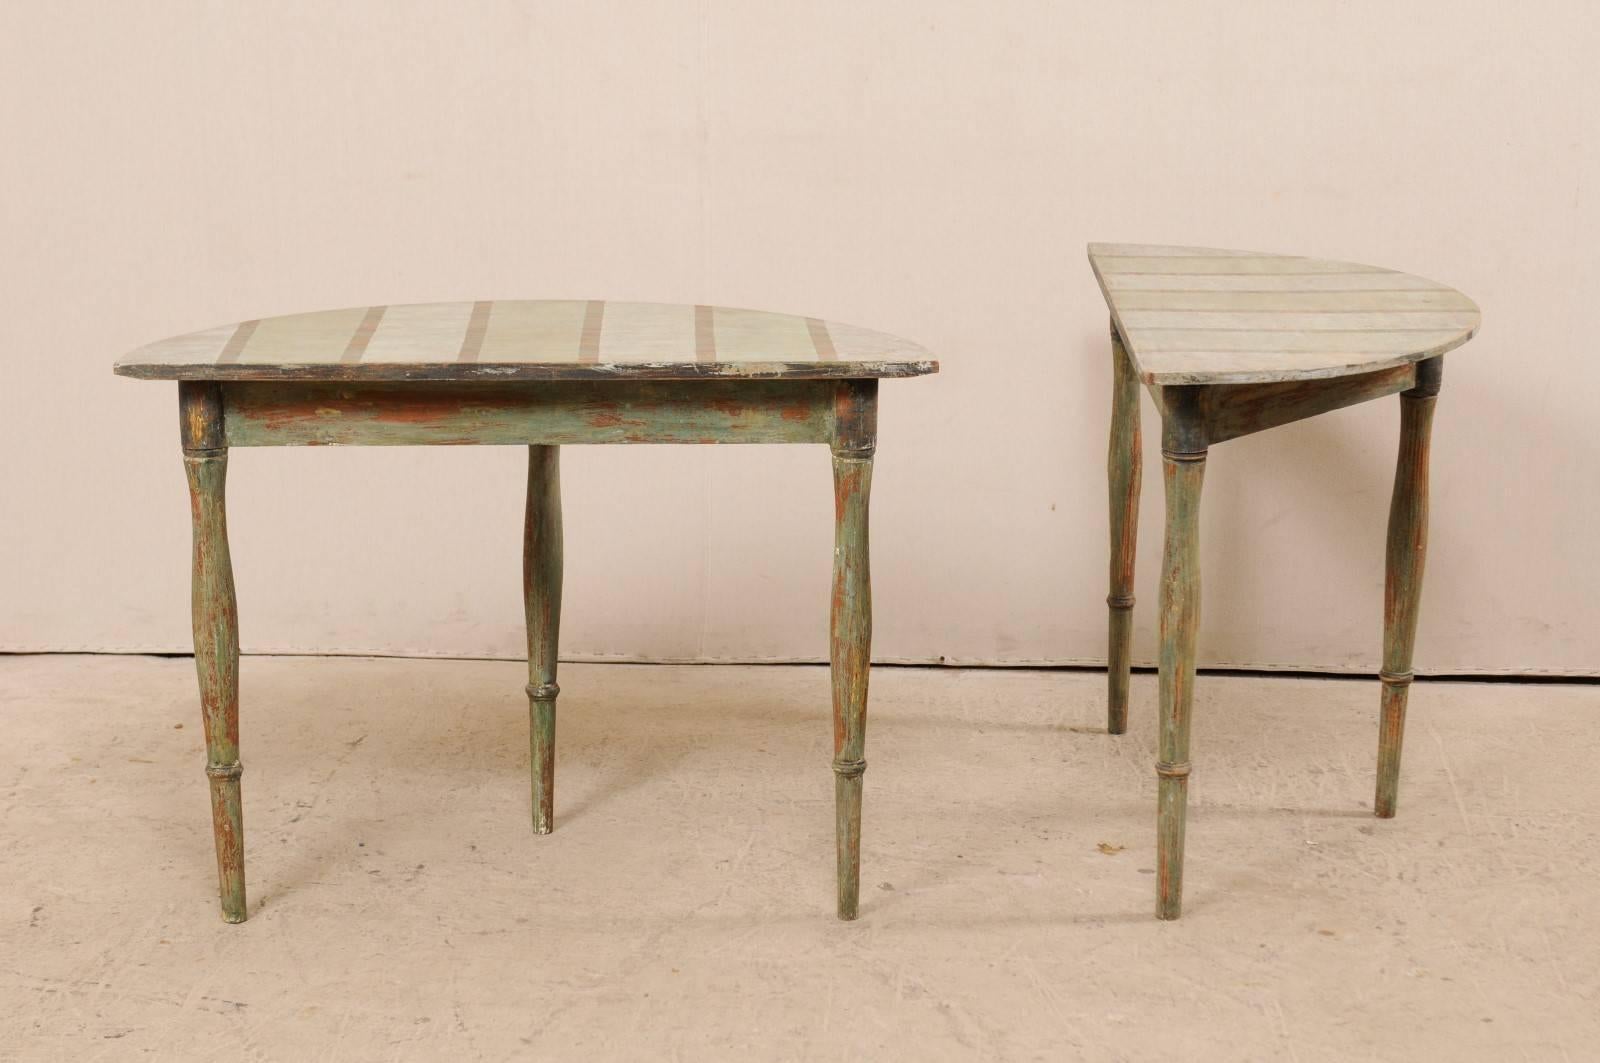 Pair of Swedish 19th Century Painted Wood Demilune Tables with Subtle Stripes 2